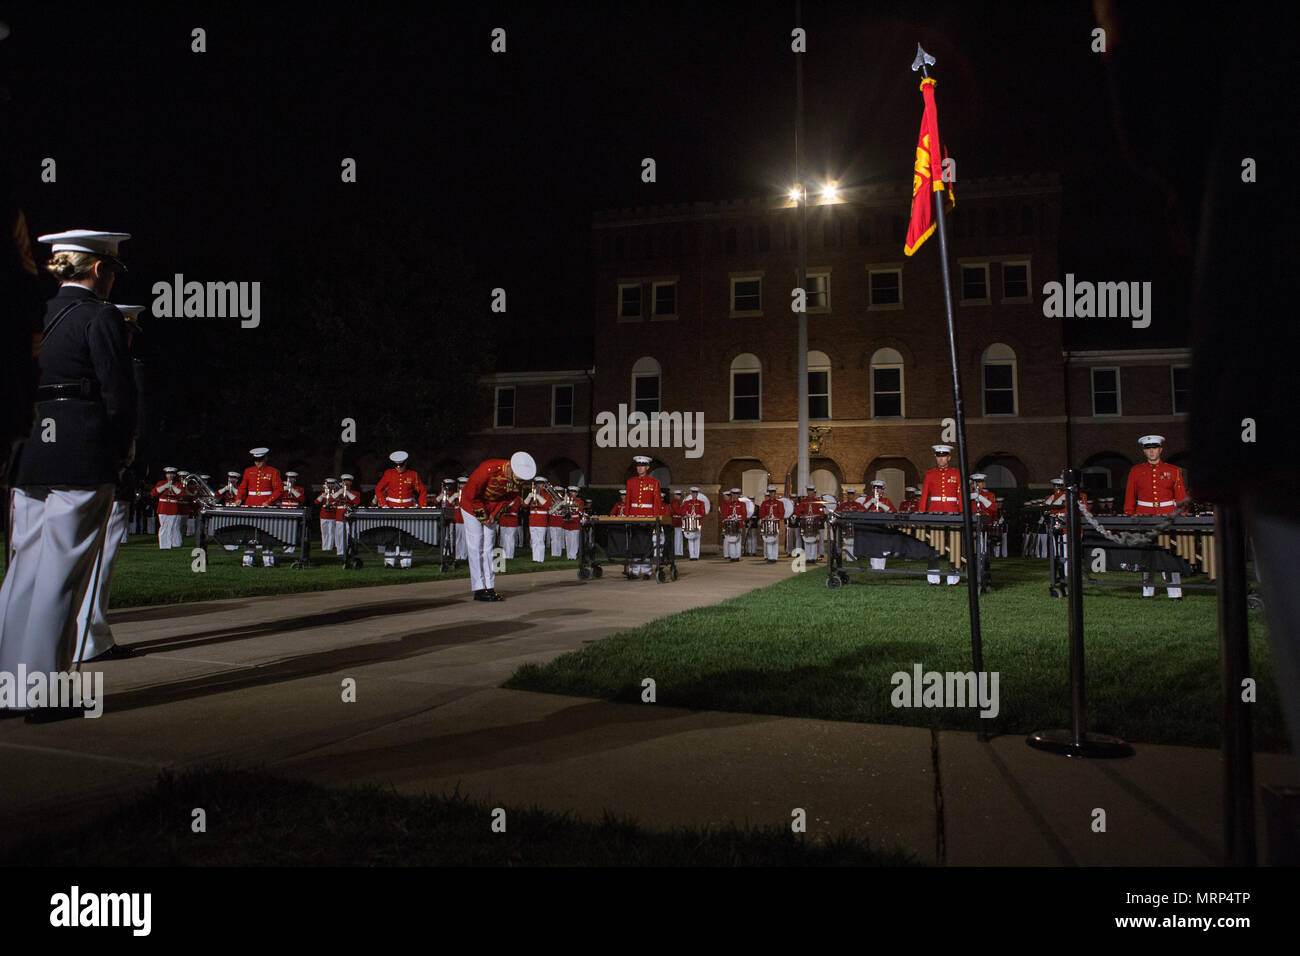 U.S. Marines with the U.S. Marine Drum and Bugle Corps perform during an evening parade at Marine Barracks Washington, Washington, D.C., June 9, 2017. Evening parades are held as a means of honoring senior officials, distinguished citizens and supporters of the Marine Corps. (U.S. Marine Corps photo by Lance Cpl. Stephon L. McRae) Stock Photo